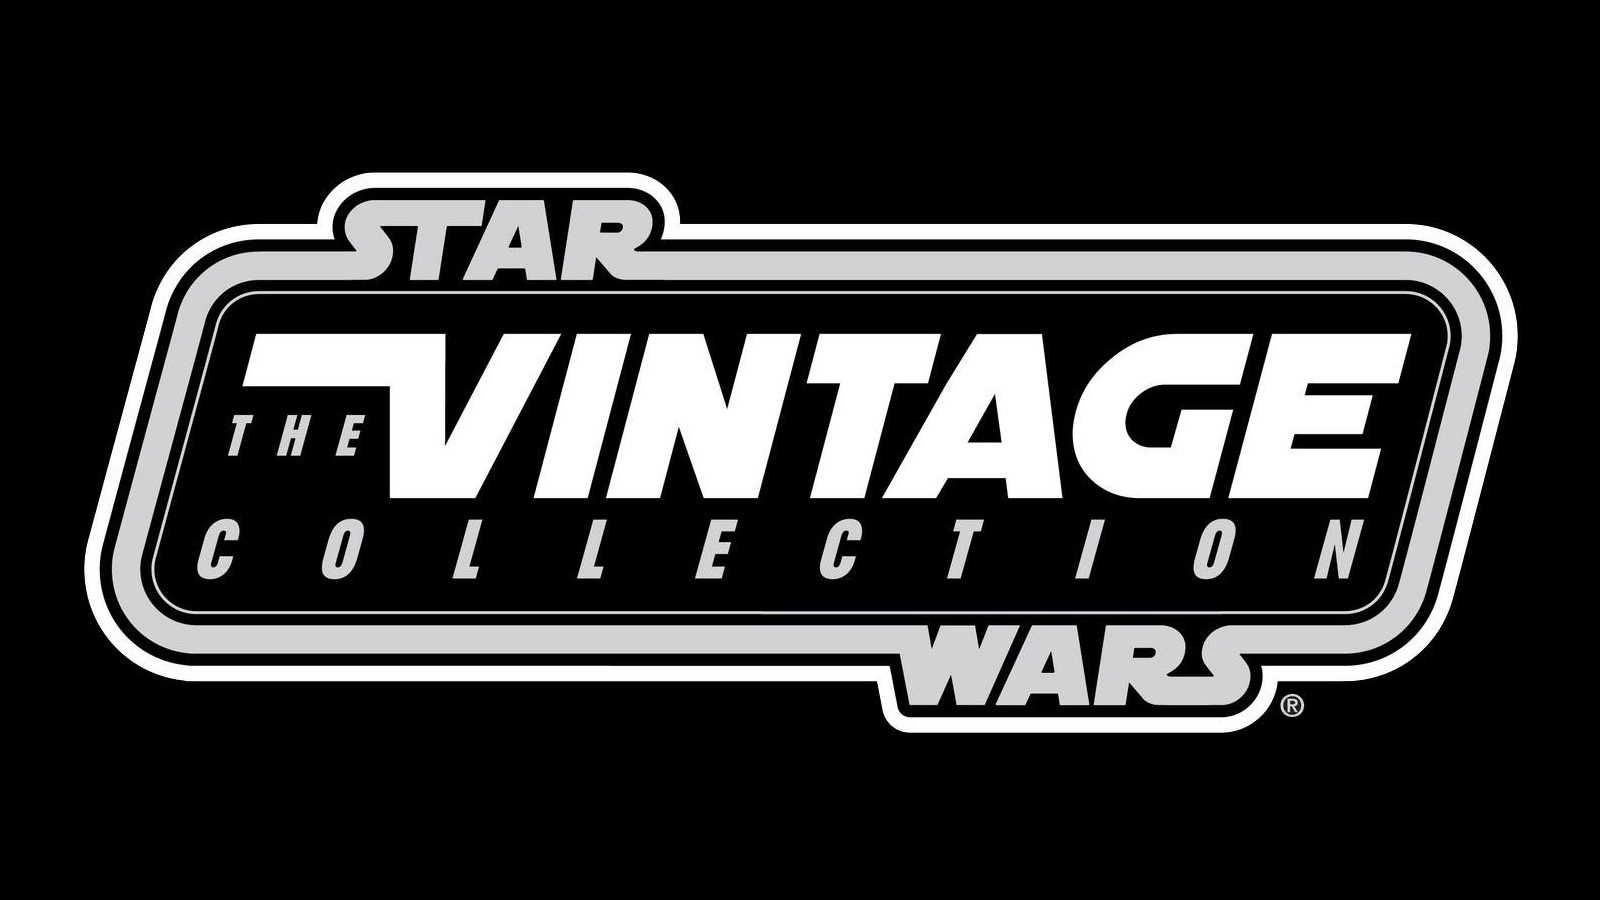 New Star Wars The Vintage Collection 3.75-Inch Product Reveal Tomorrow 12/6/22 at 11am ET